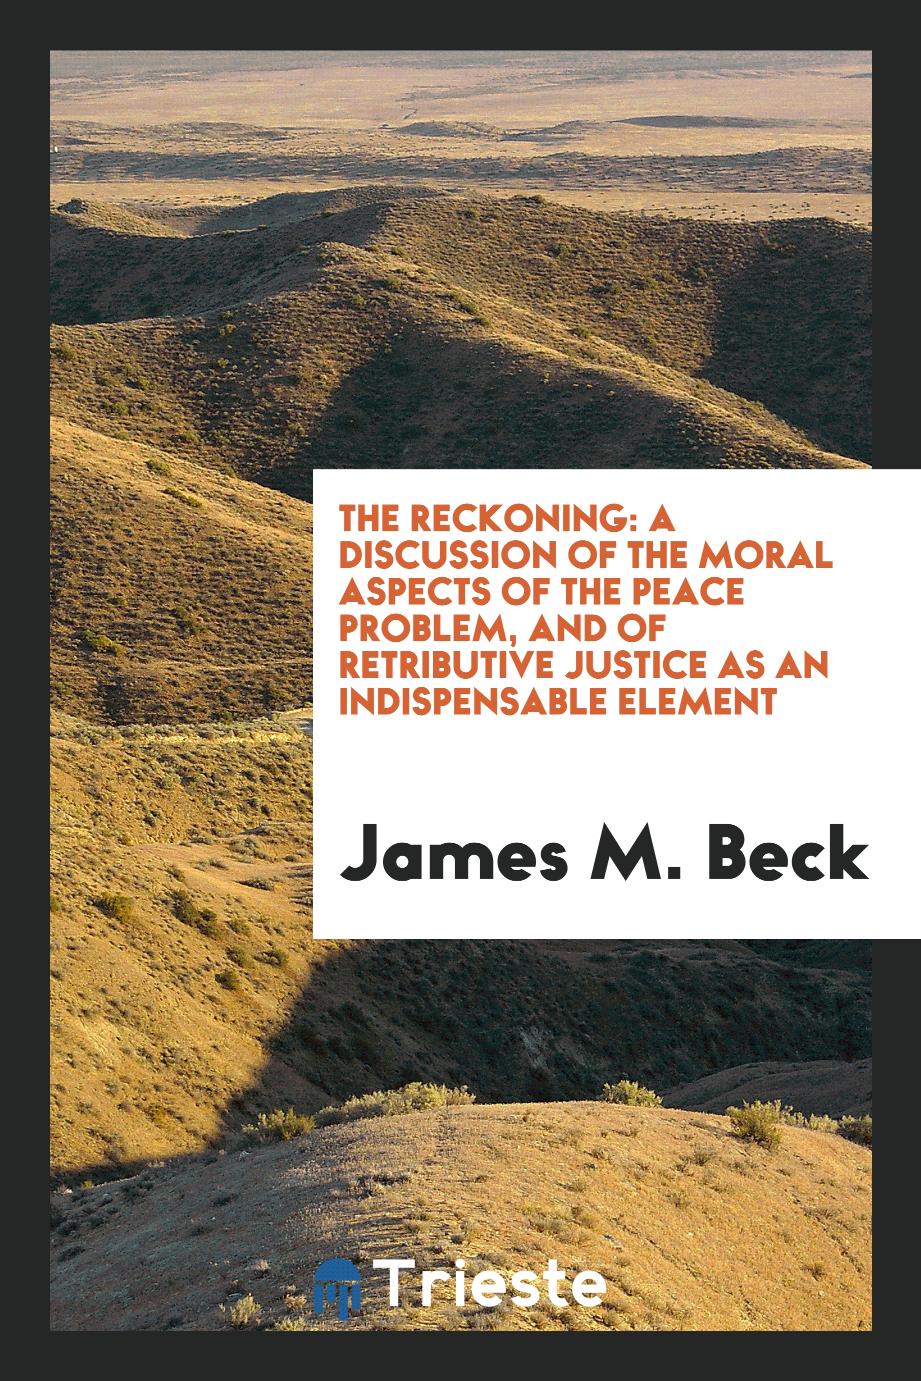 The reckoning: a discussion of the moral aspects of the peace problem, and of retributive justice as an indispensable element